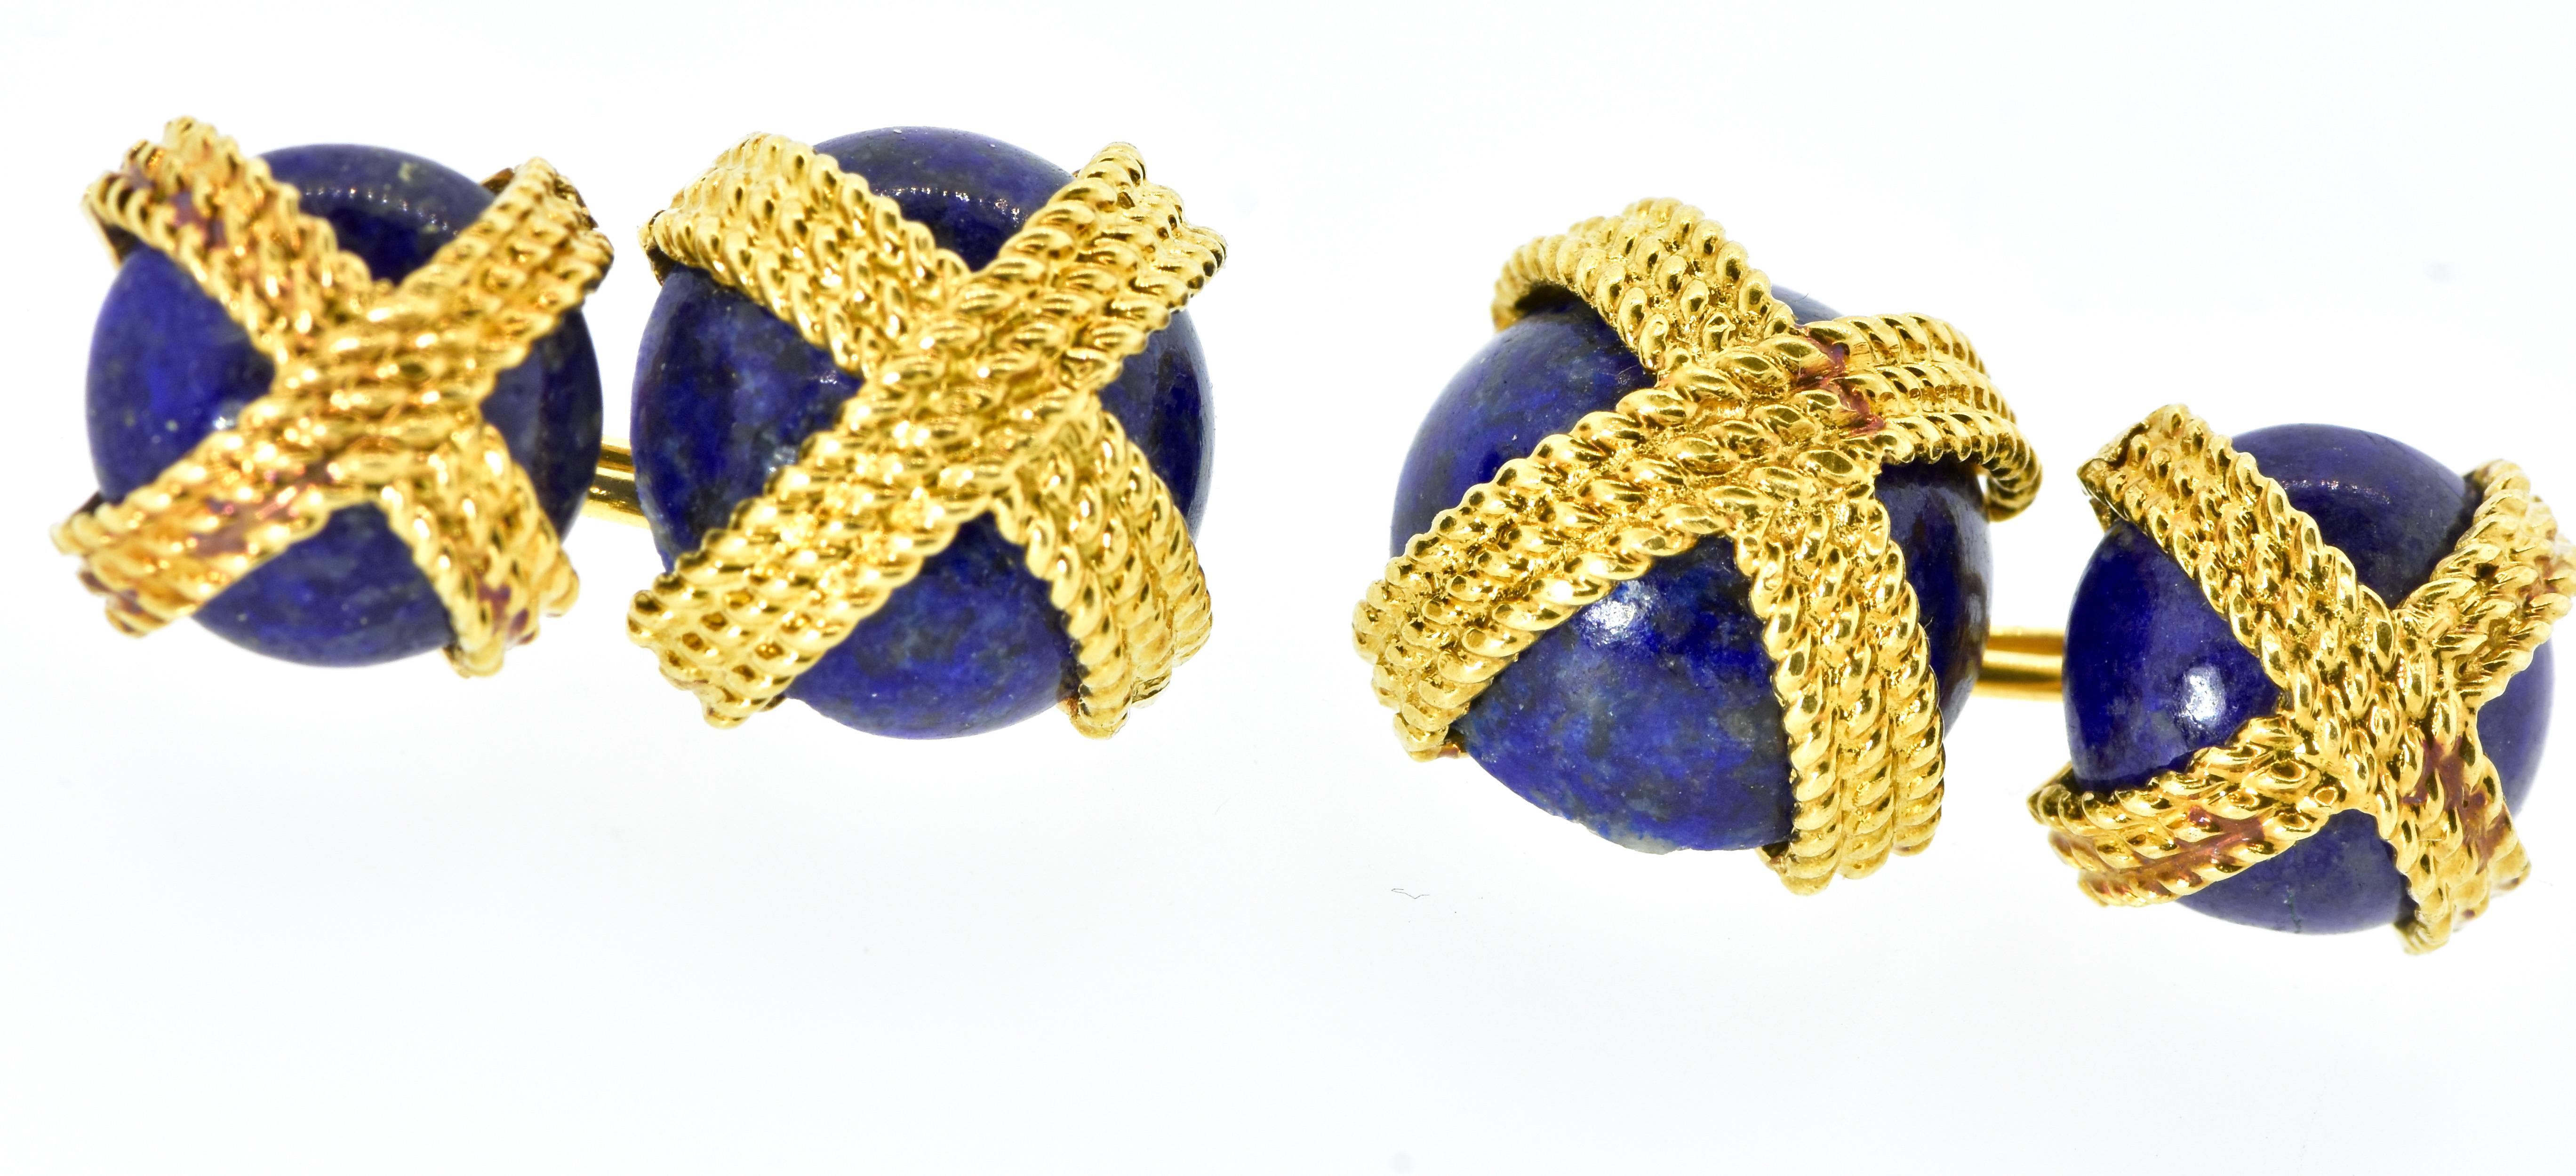 Contemporary Cufflinks Van Cleef & Arpels 18k and Fine Lapis Back to Back Vintage, 1960